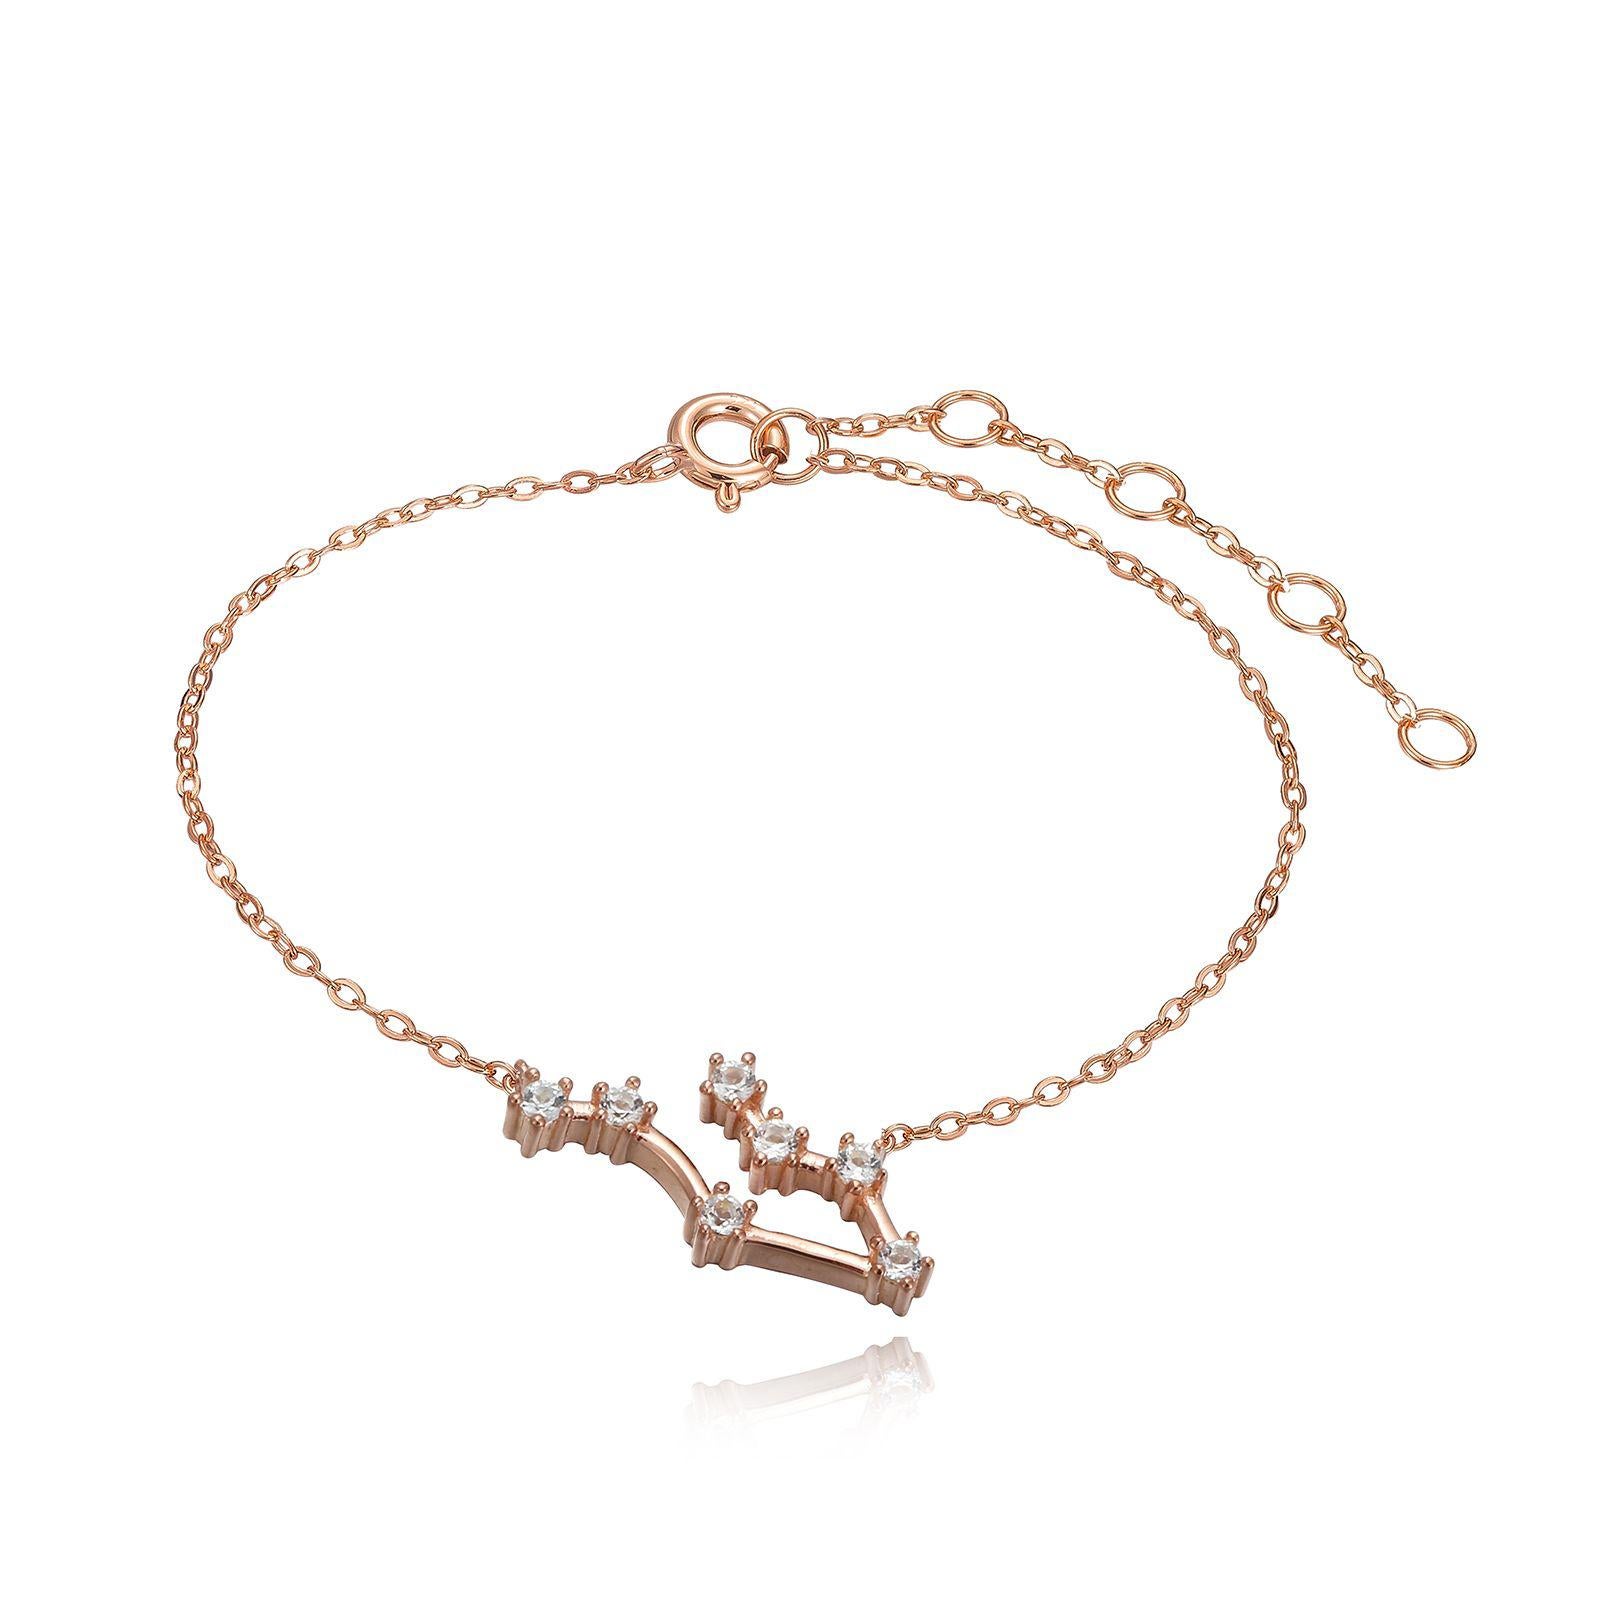 You are unique and your zodiac tells part of your story.  How your zodiac is displayed in the beautiful nighttime sky is what we want you to carry with you always. This gemini constellation bracelet shares a part of your personality with us all 